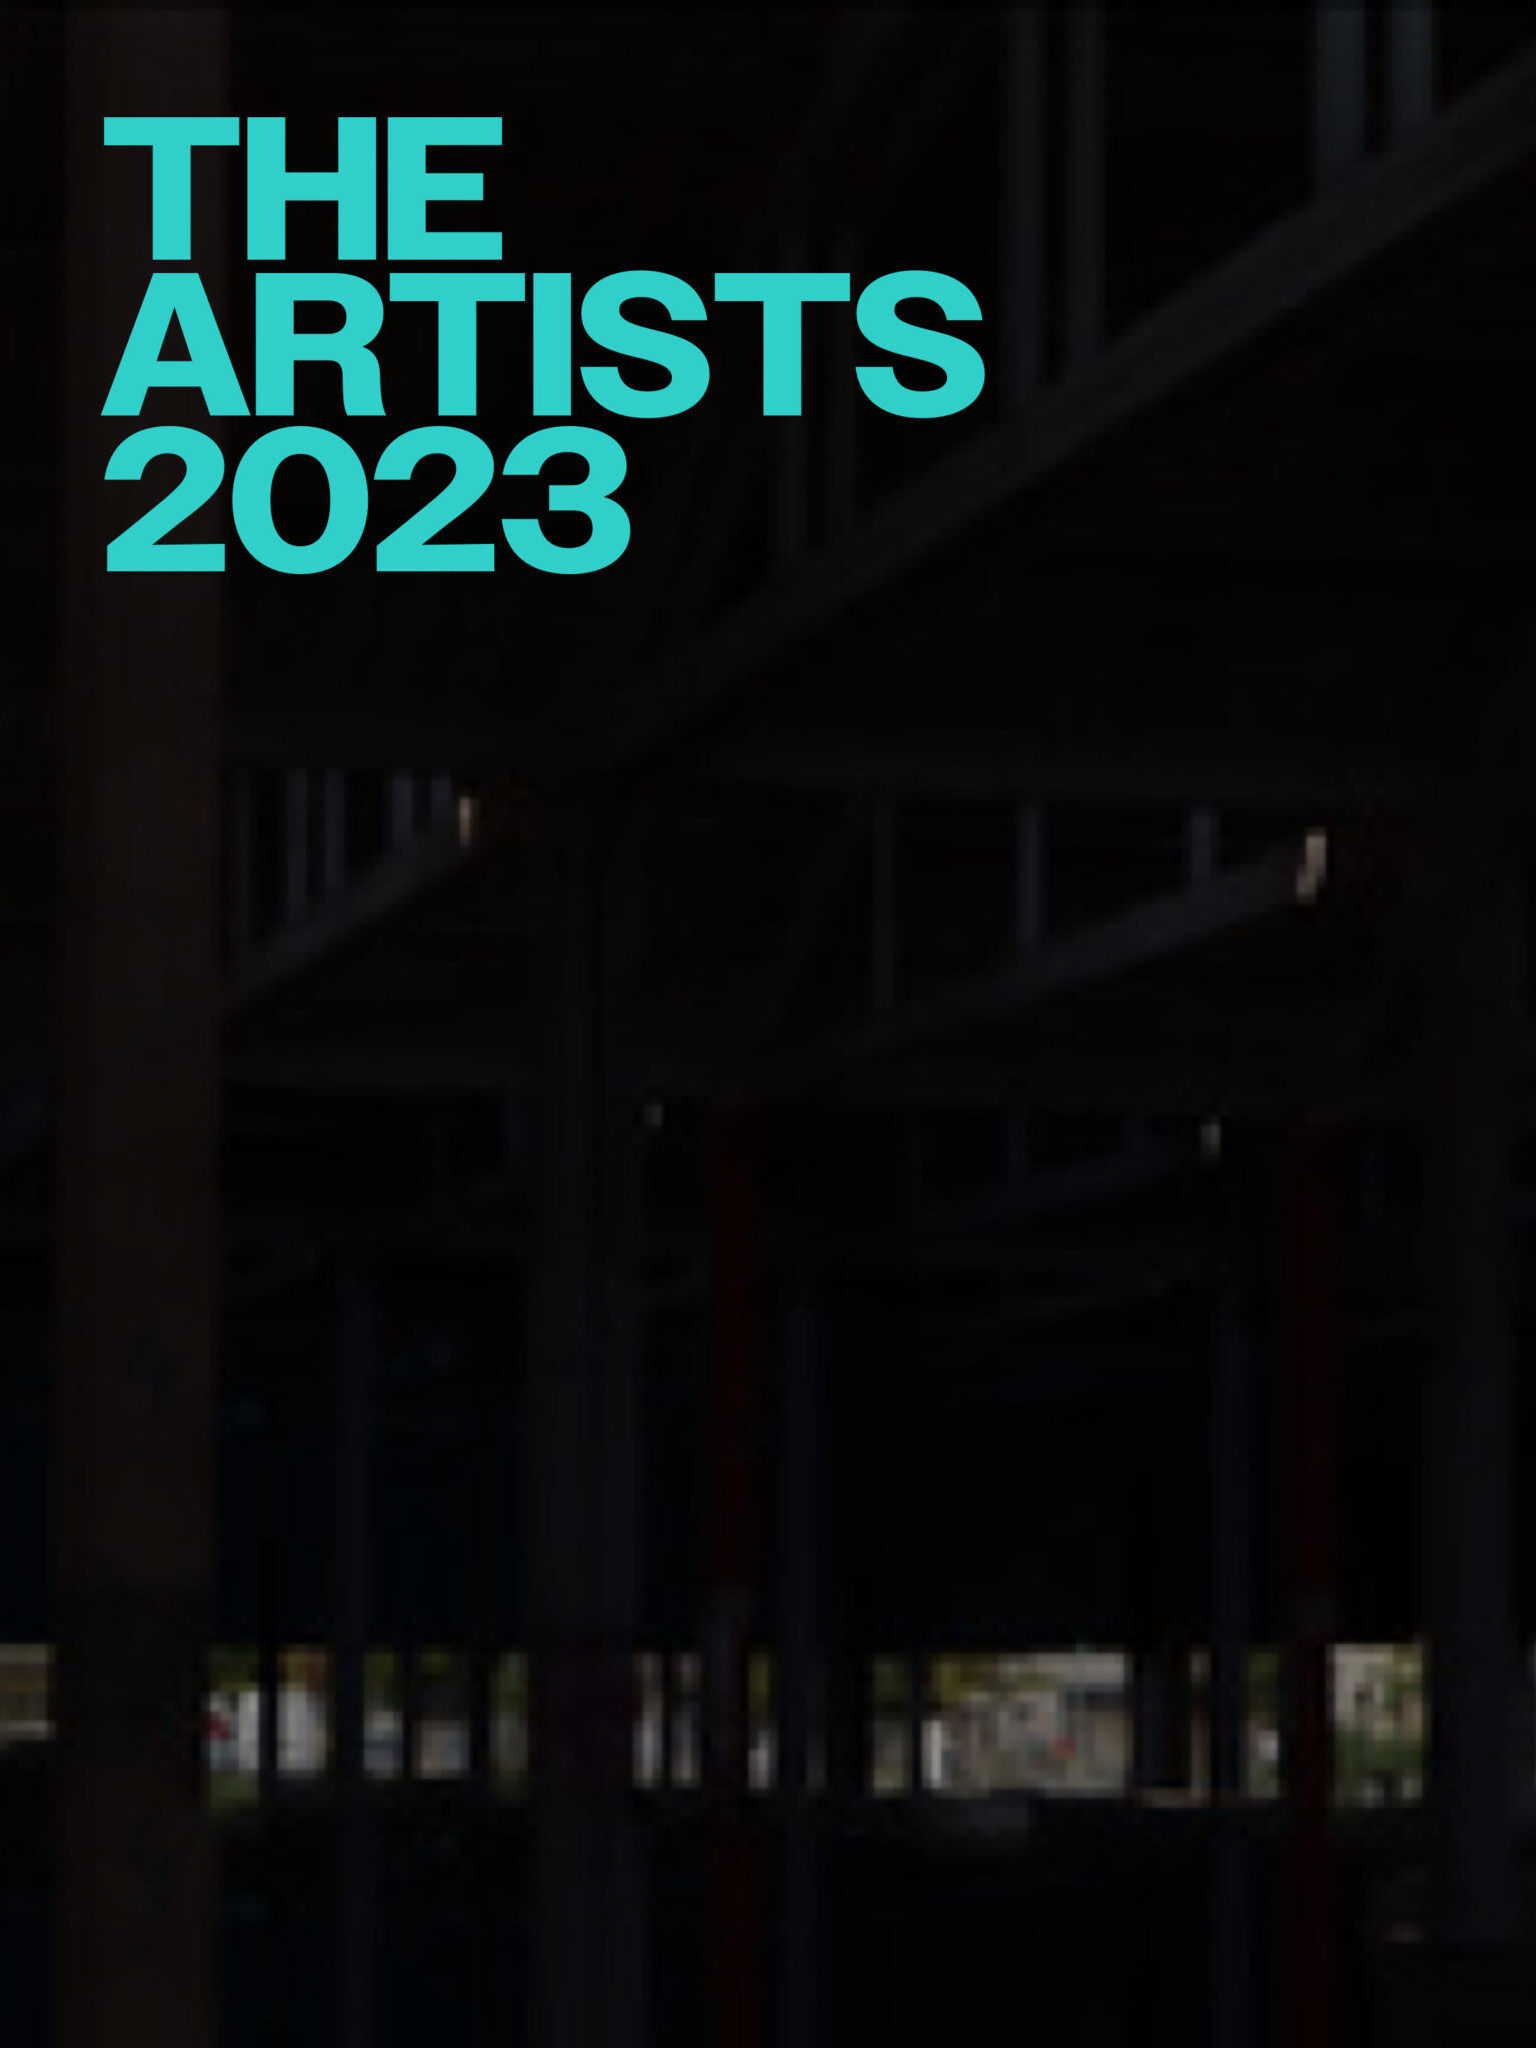 The artists of the year 2023